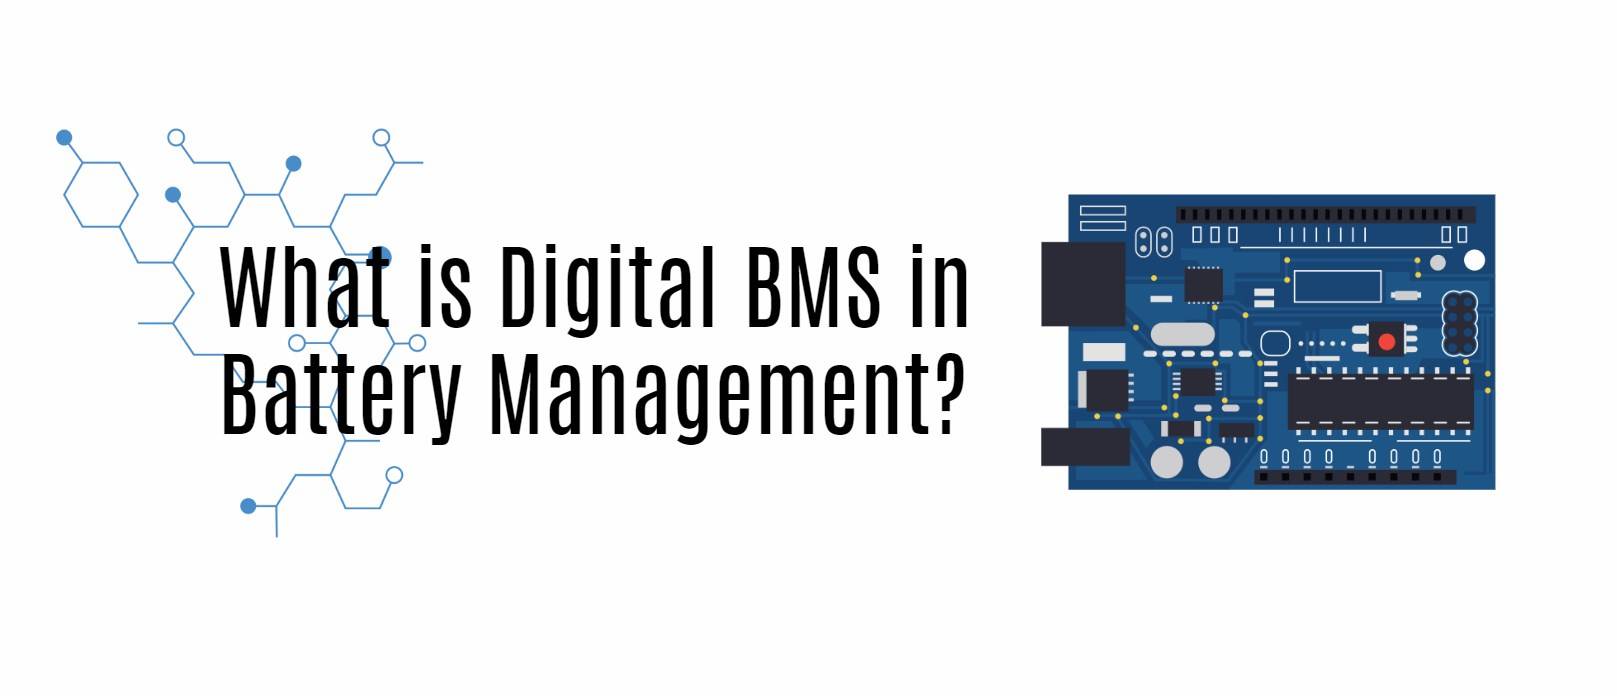 What is Digital BMS in Battery Management?